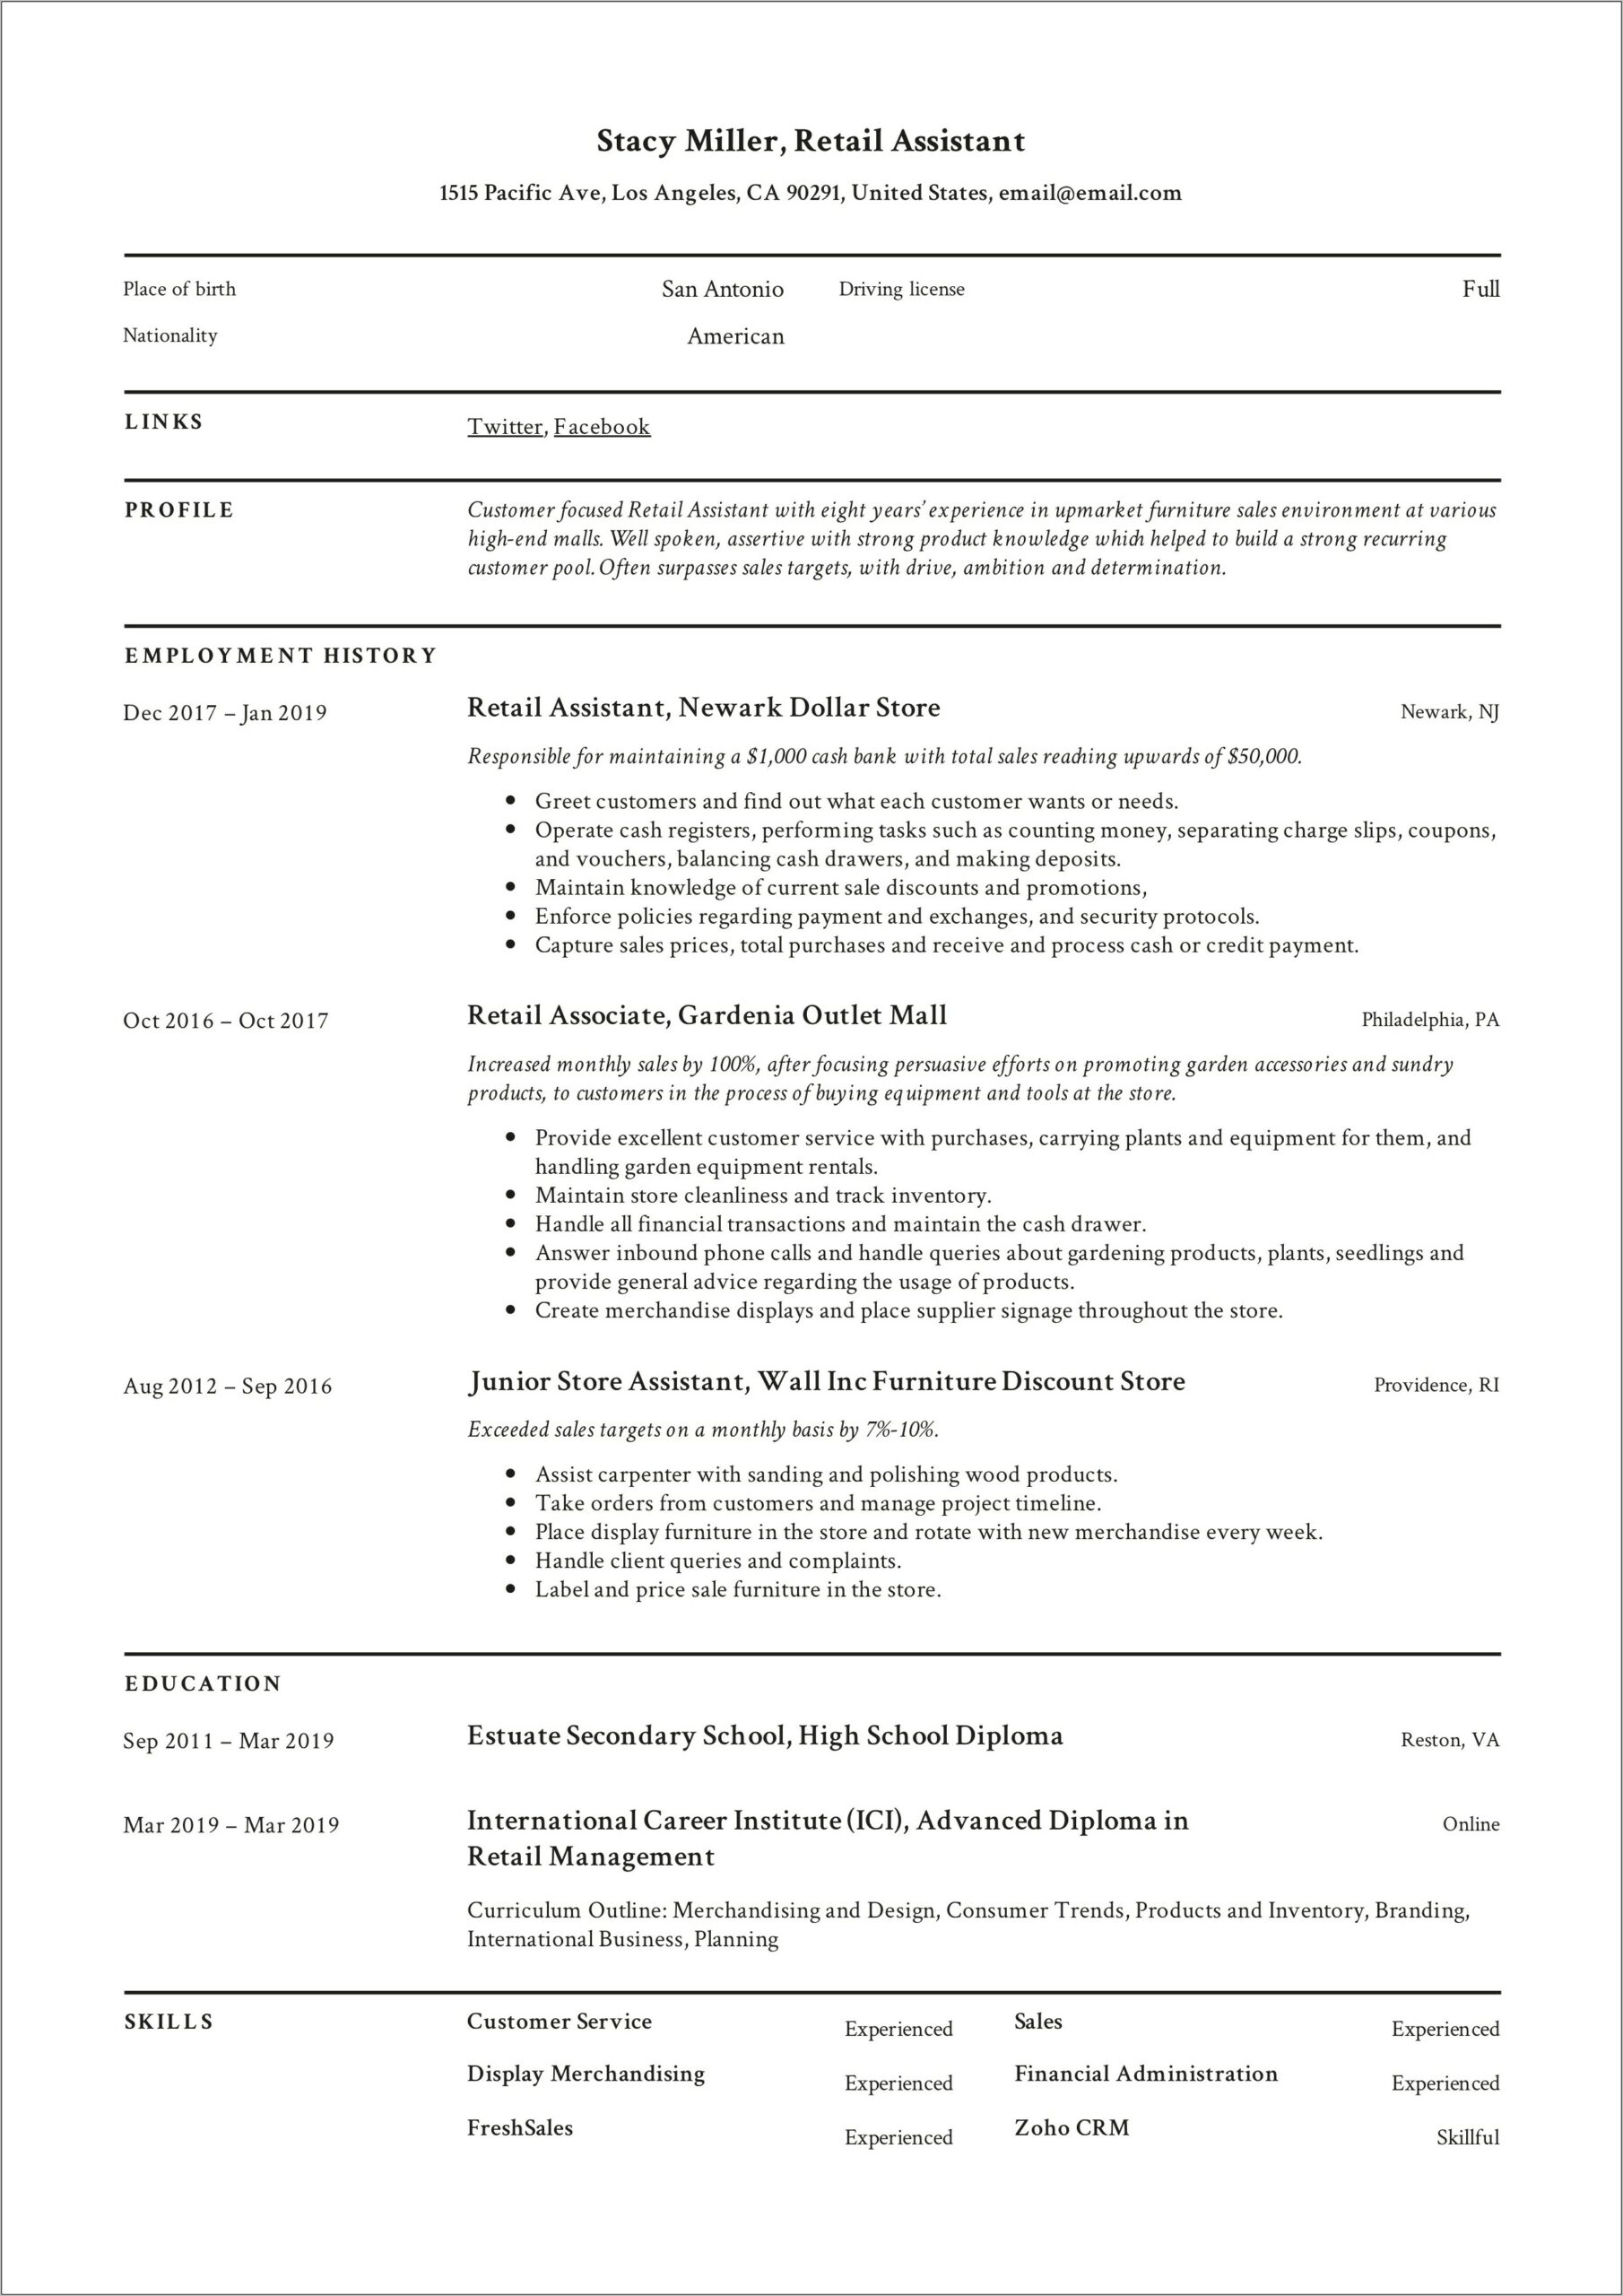 Resume Skills Section For Retail